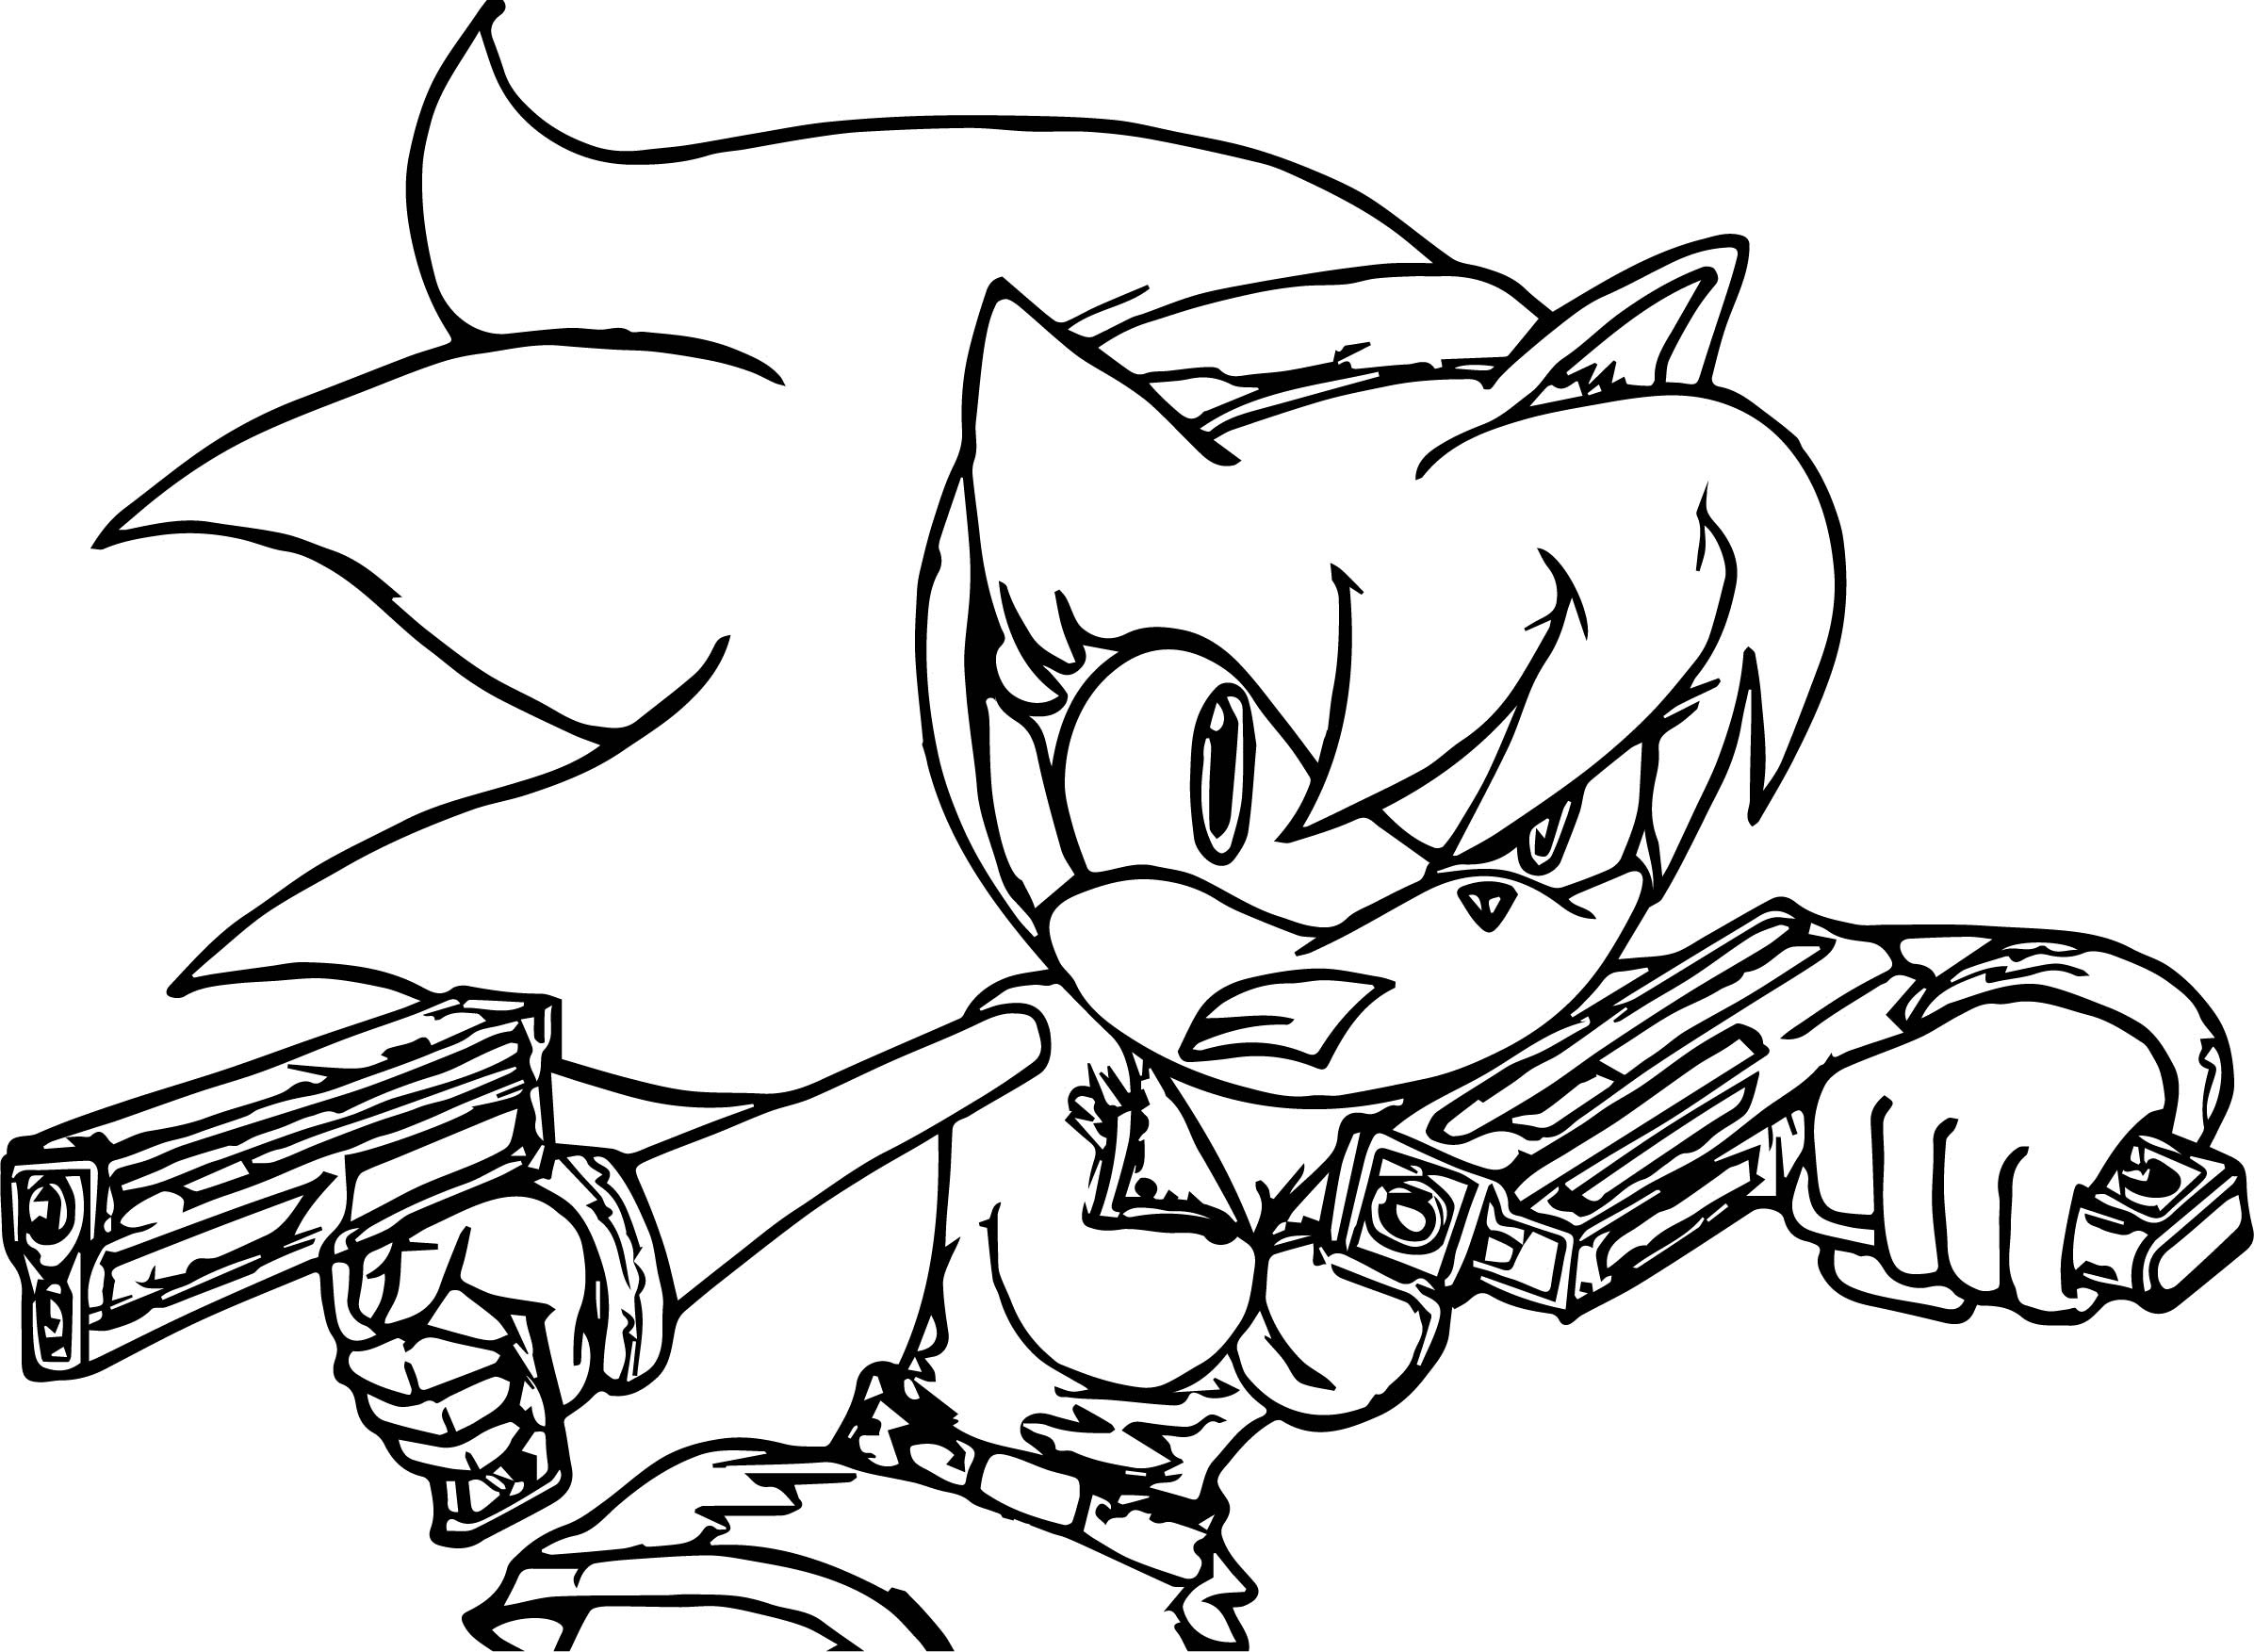 sonic-exe-coloring-pages-printable